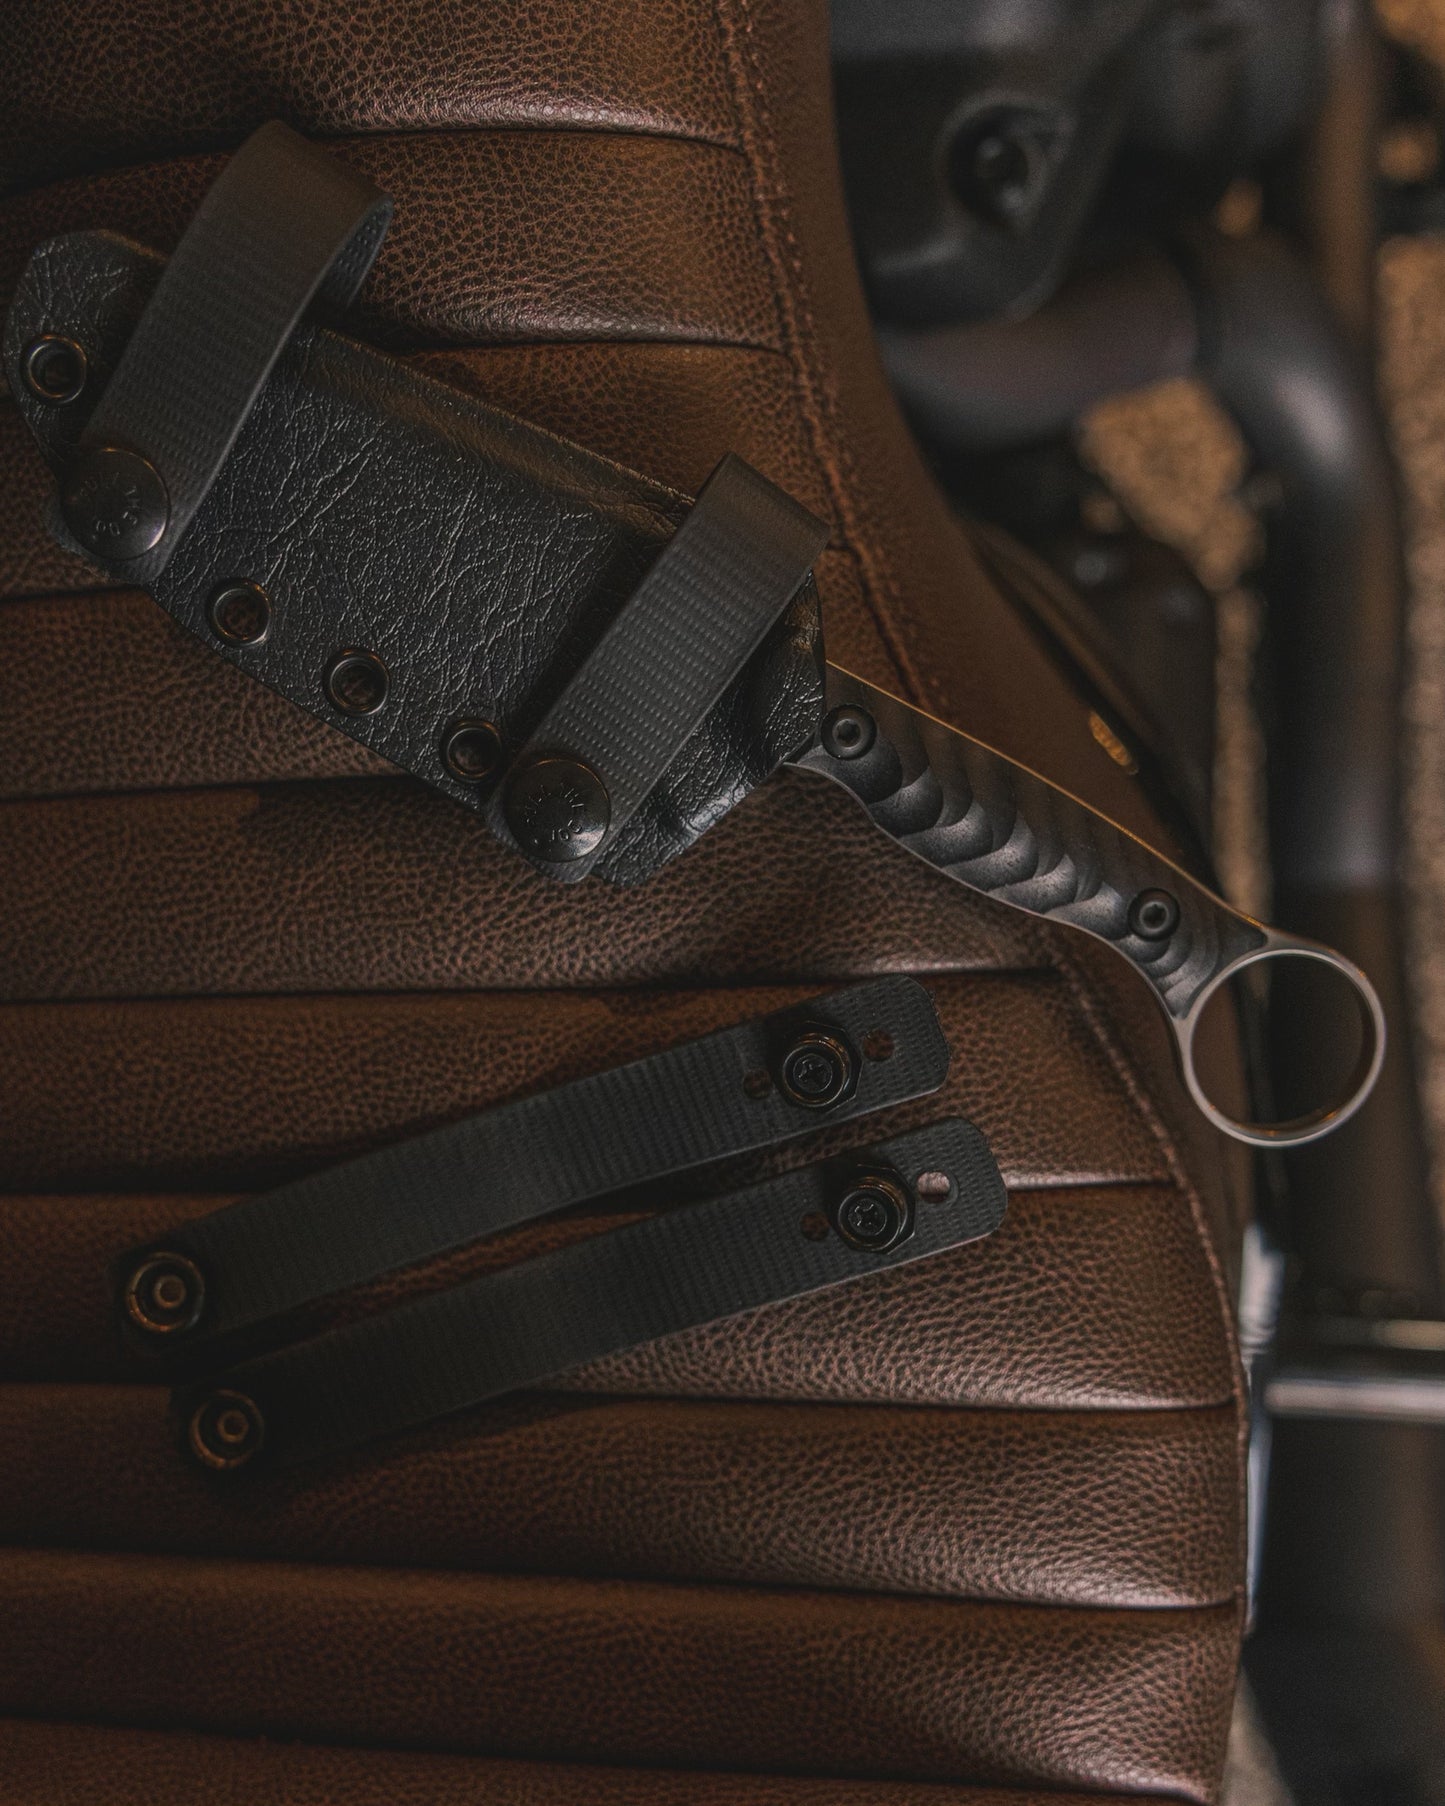 The Nomad Horizontal Carry Belt Loops